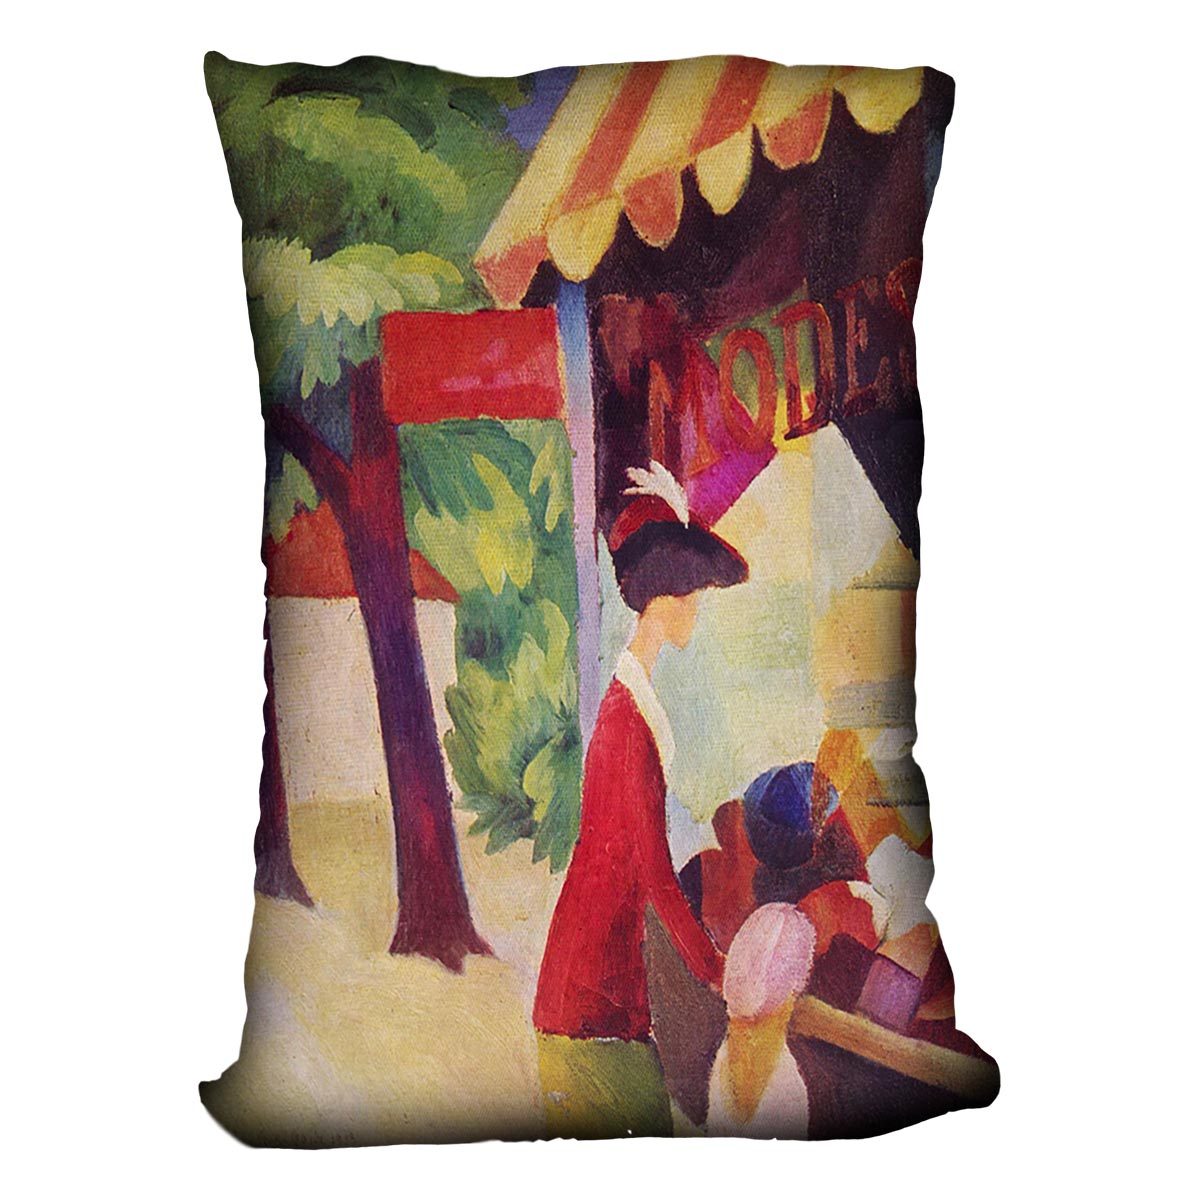 Before Hutladen woman with a red jacket and child by Macke Cushion - Canvas Art Rocks - 4